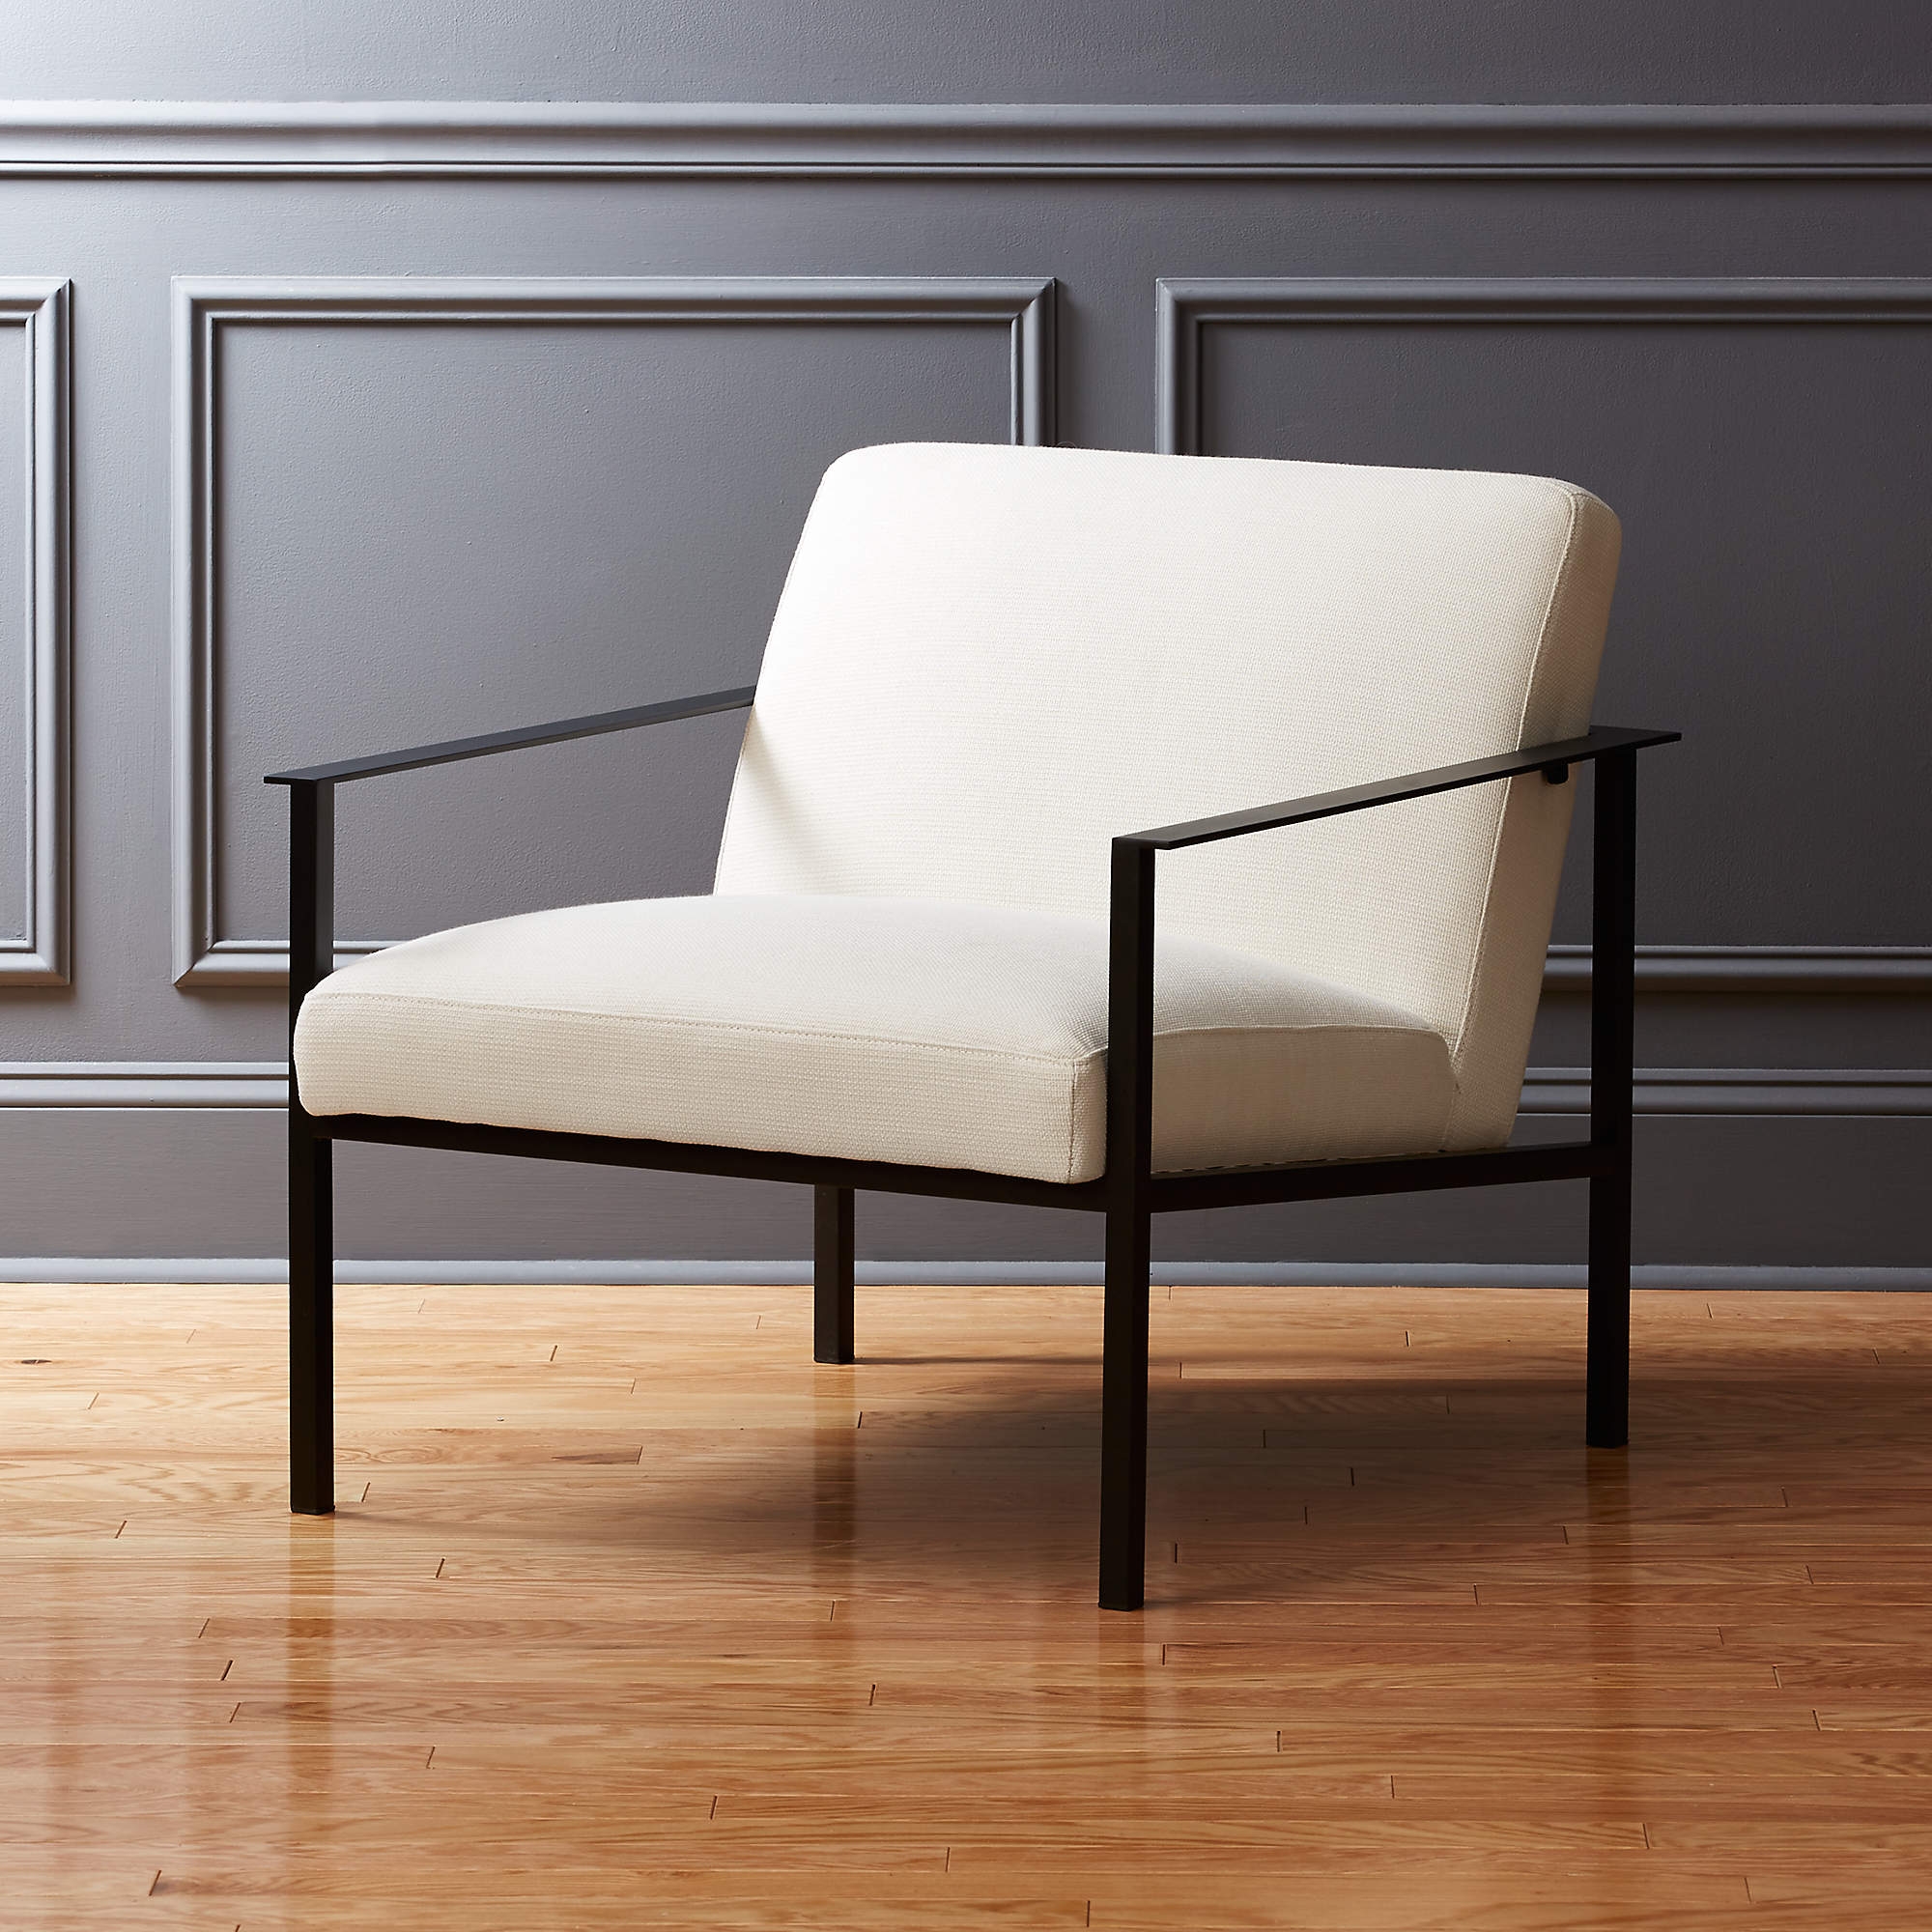 Cue White Chair with Black Legs - Image 4